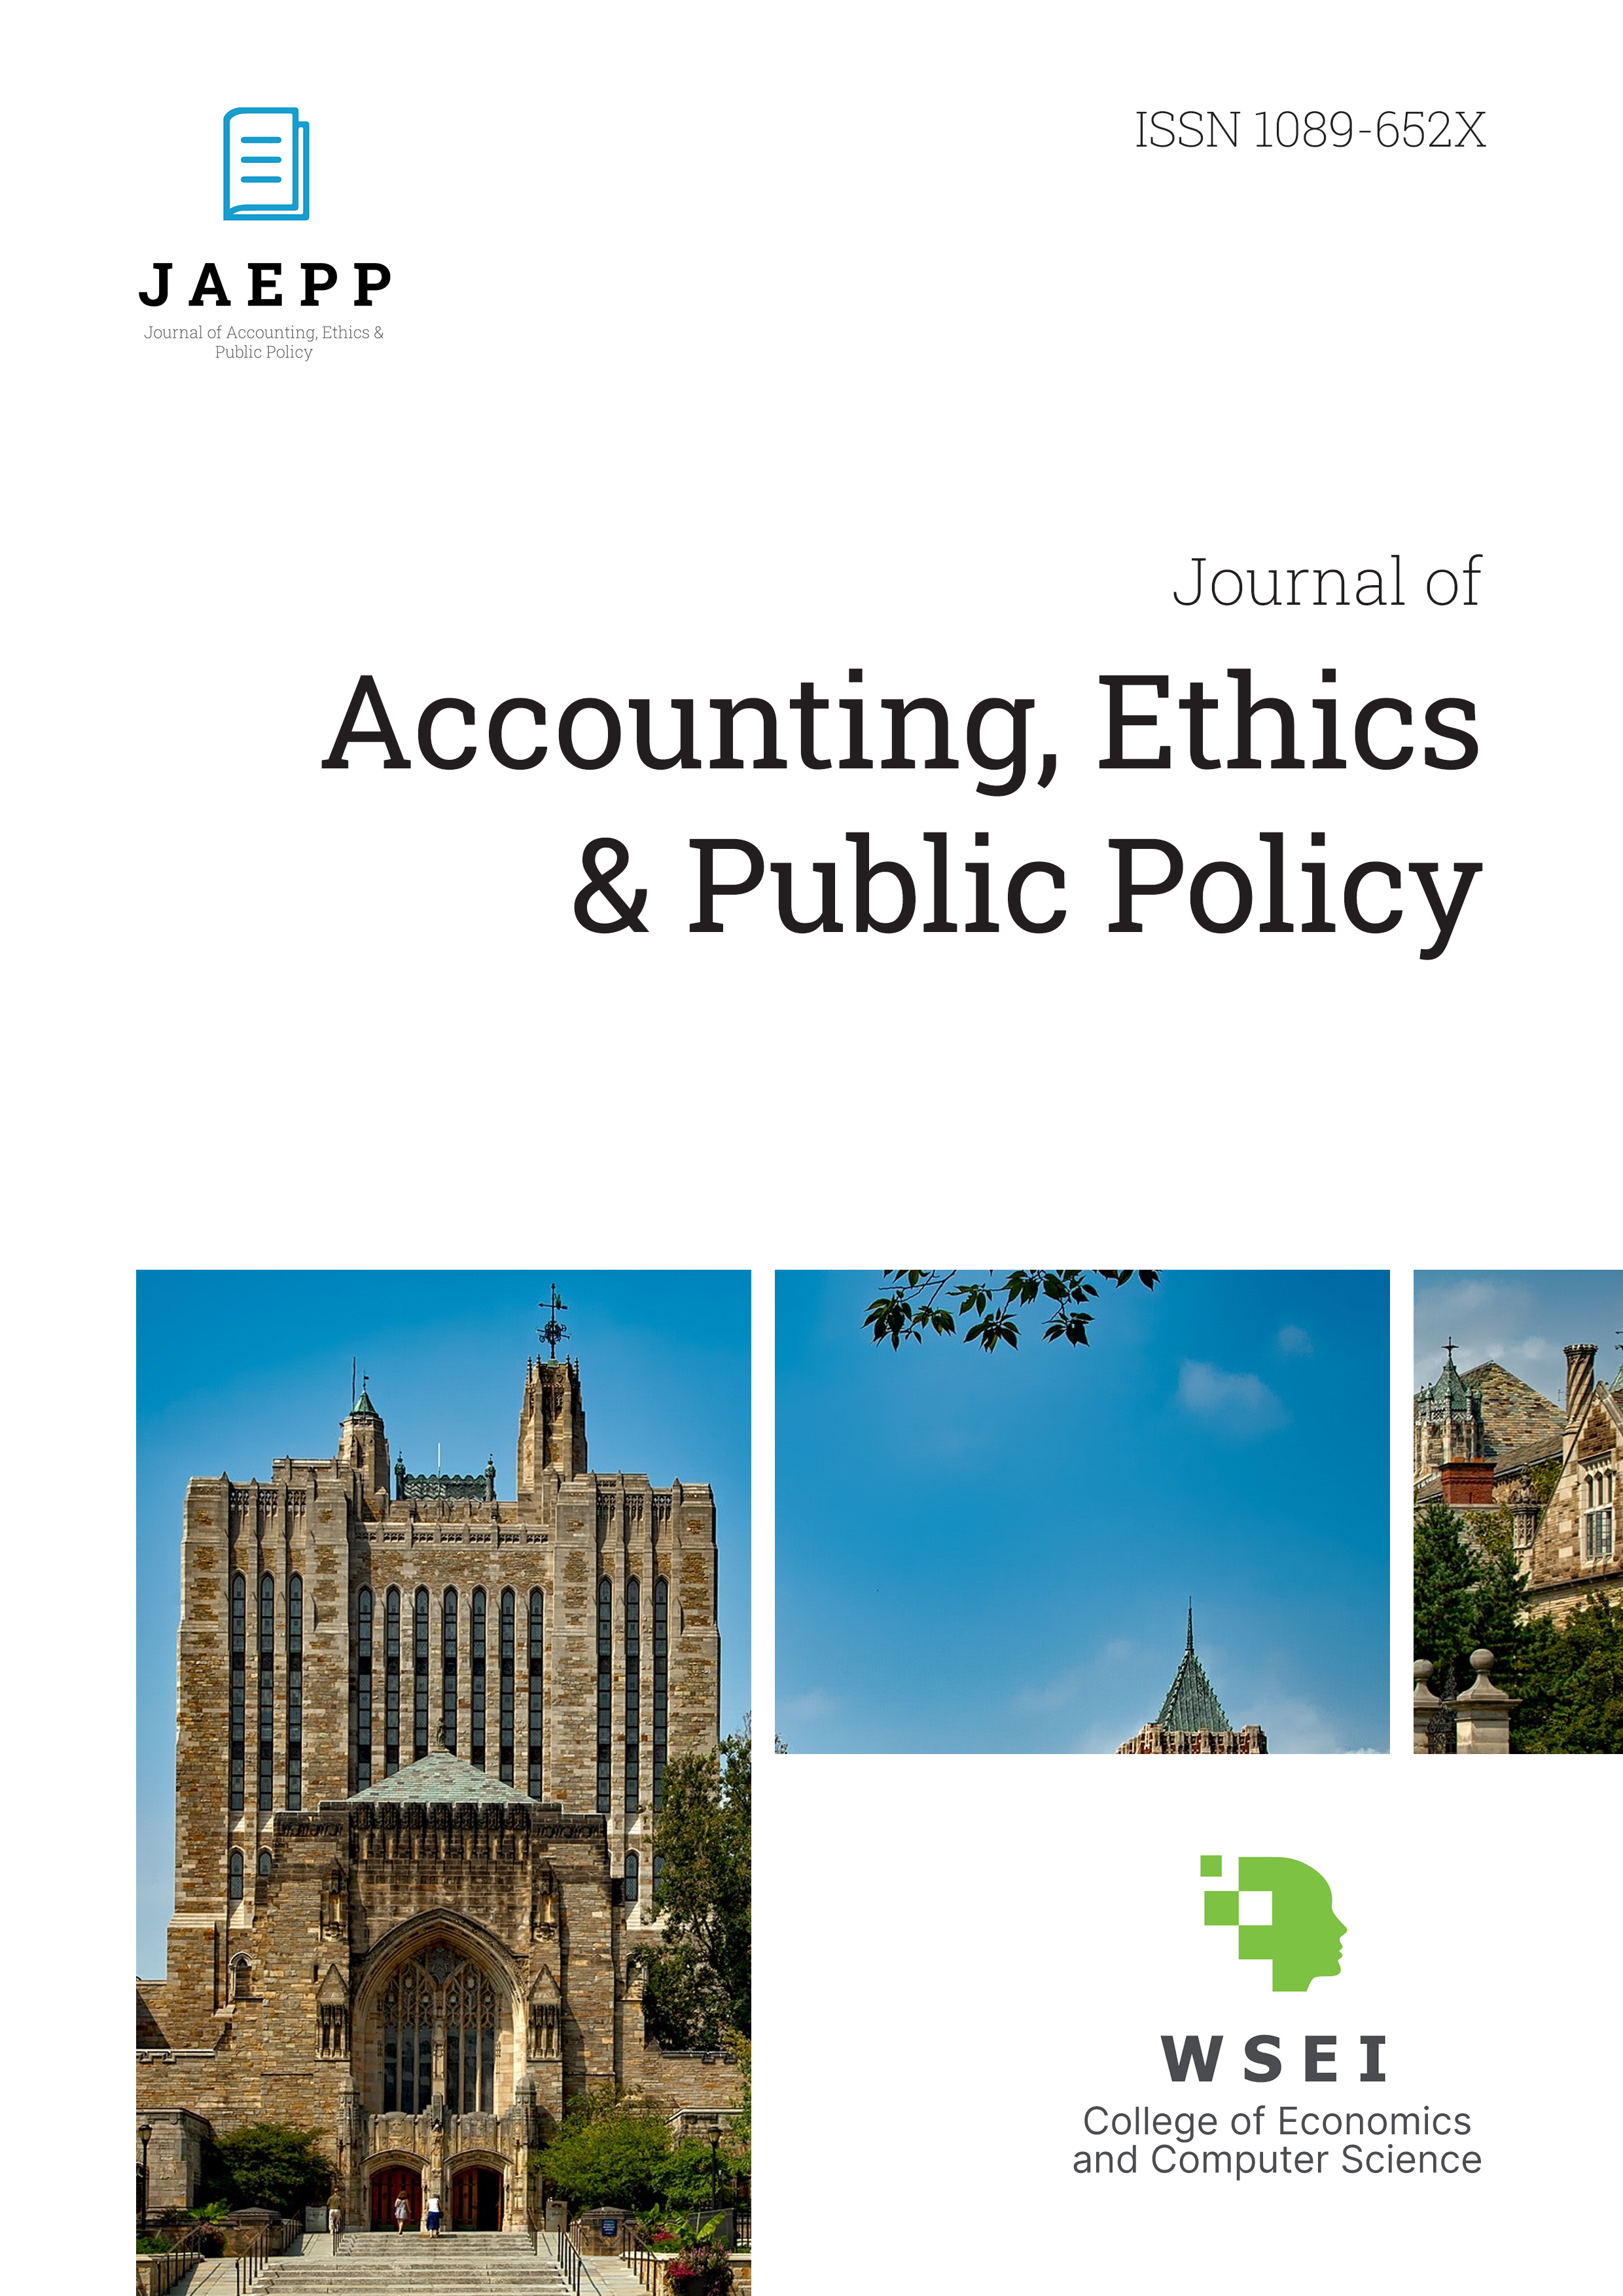 					View Vol. 19 No. 4 (2018): Journal of Accounting, Ethics & Public Policy, JAEPP
				